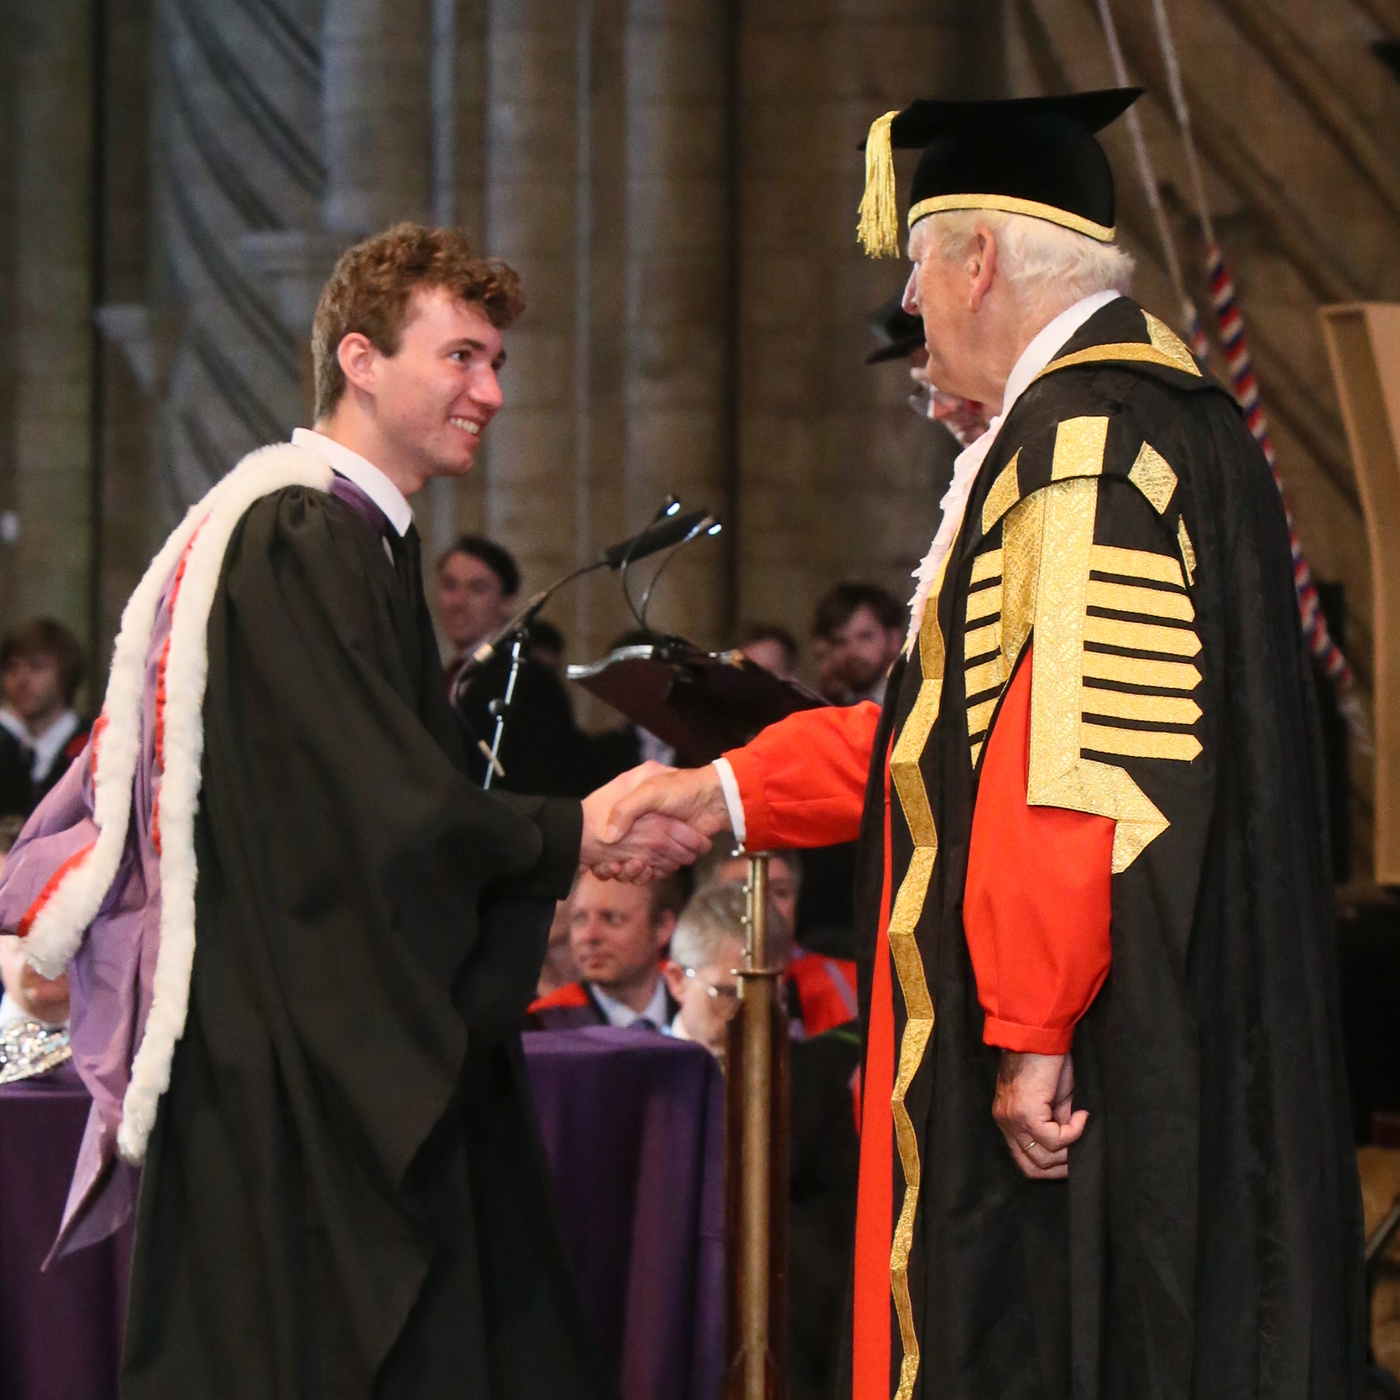 Me shaking hands with an important-looking official in ceremonial dress during my graduation